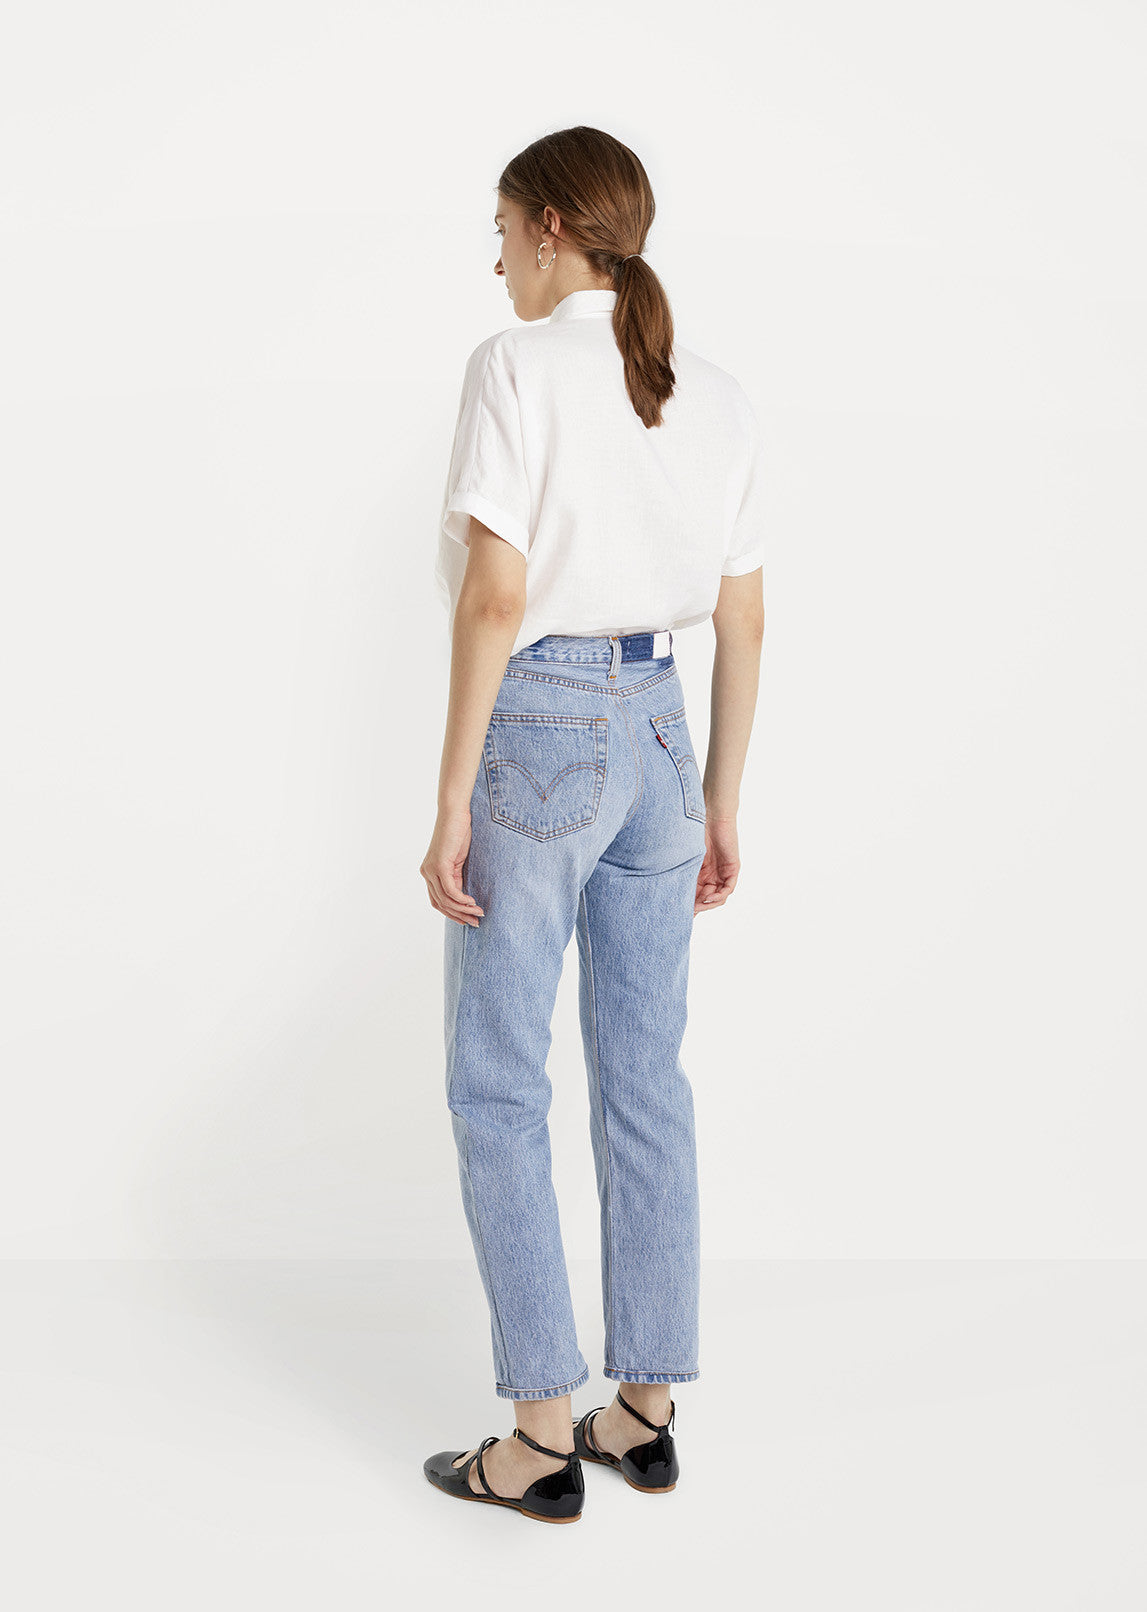 levi's ultra high rise jeans